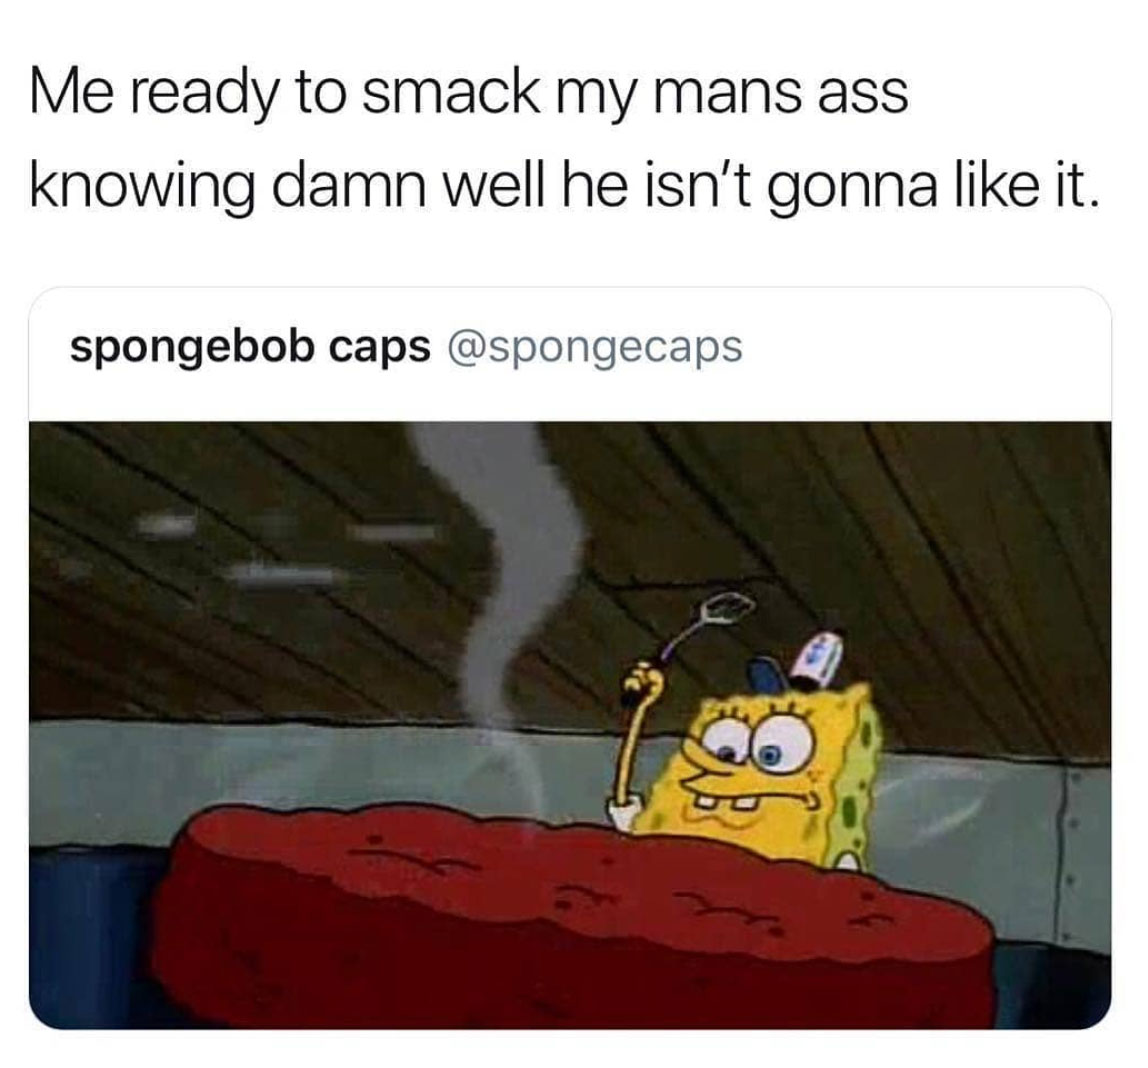 your girl minding her business - Me ready to smack my mans ass knowing damn well he isn't gonna it. spongebob caps